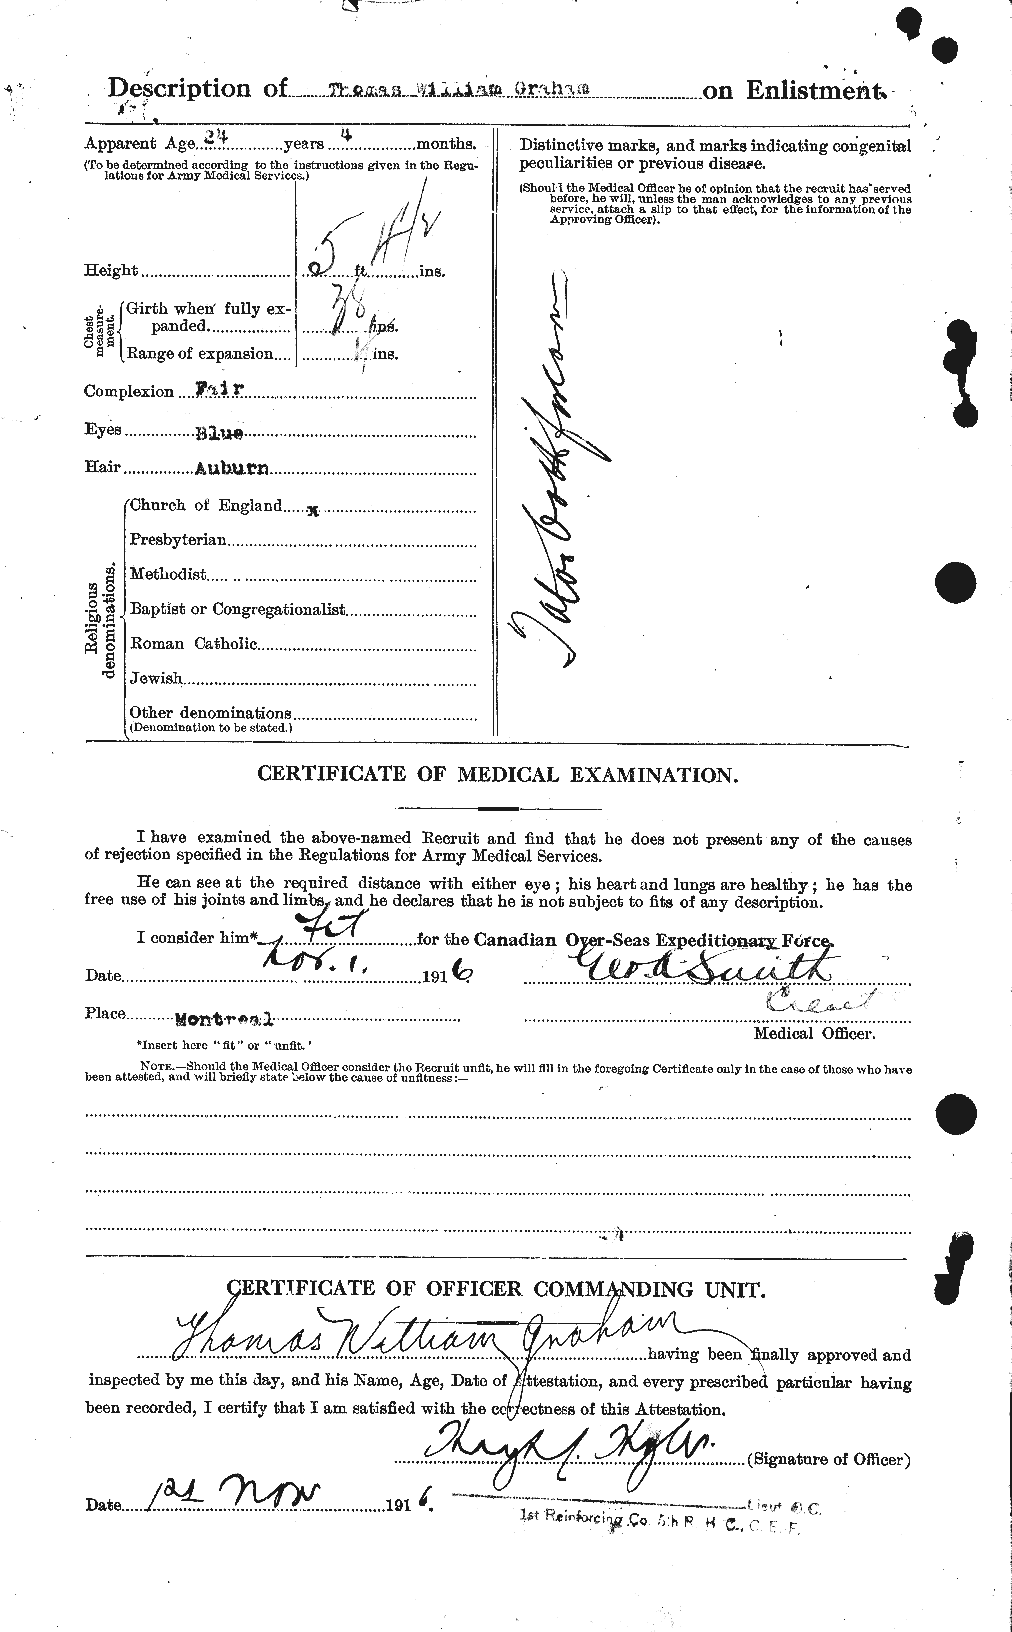 Personnel Records of the First World War - CEF 359530b